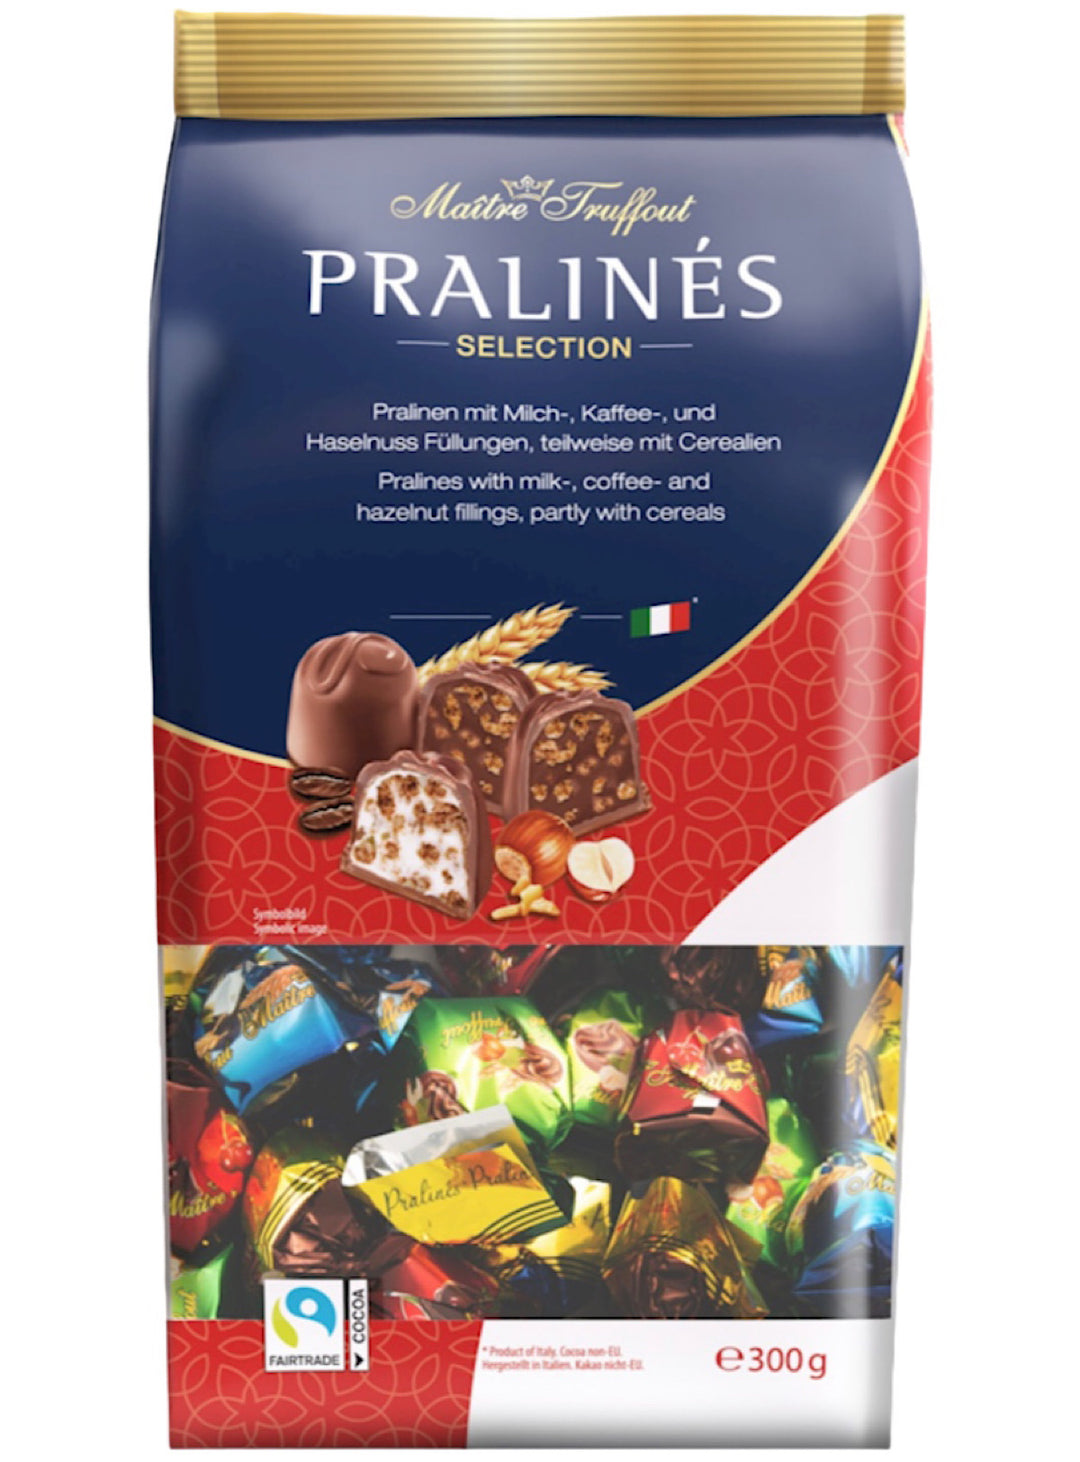 Assorted Pralines Chocolate Candy - Matre Truffout - 300g